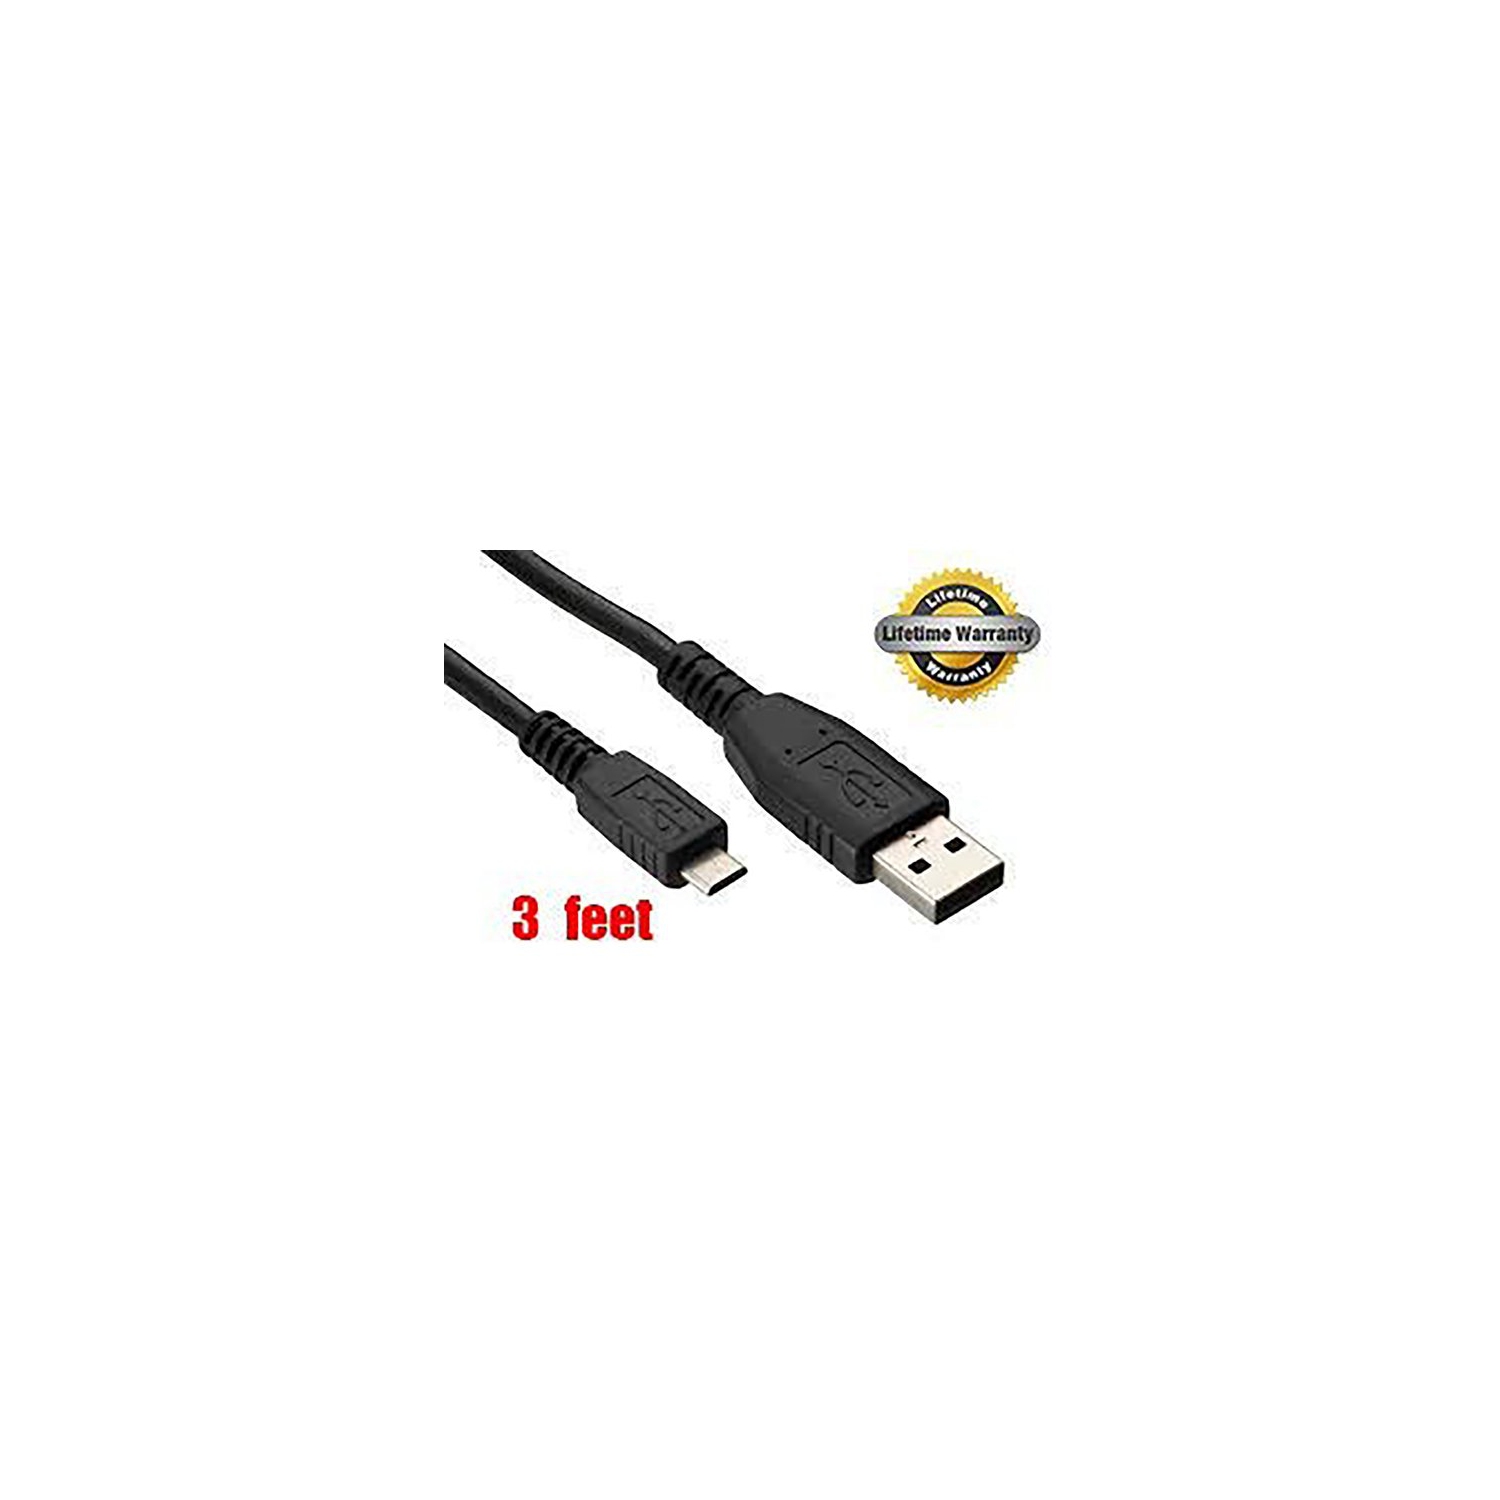 USB to Micro-USB Cable - 3 Ft. - Nickel Plated- Charging Cable and Data Transfer for Amazon Kindle Fire